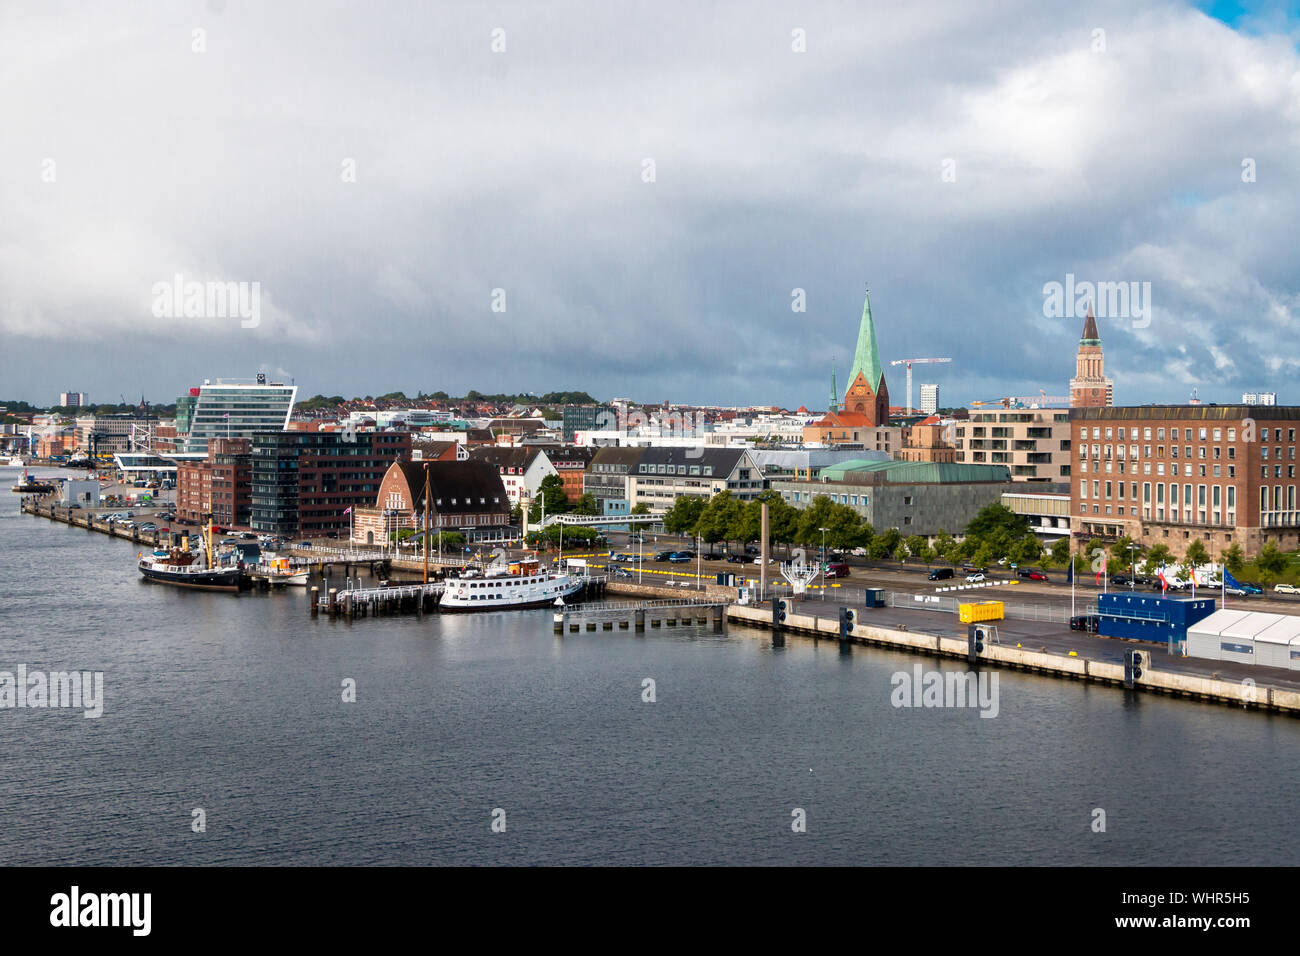 View at the city Kiel, the harbor and the coastline, a beautiful city in North Germany Stock Photo